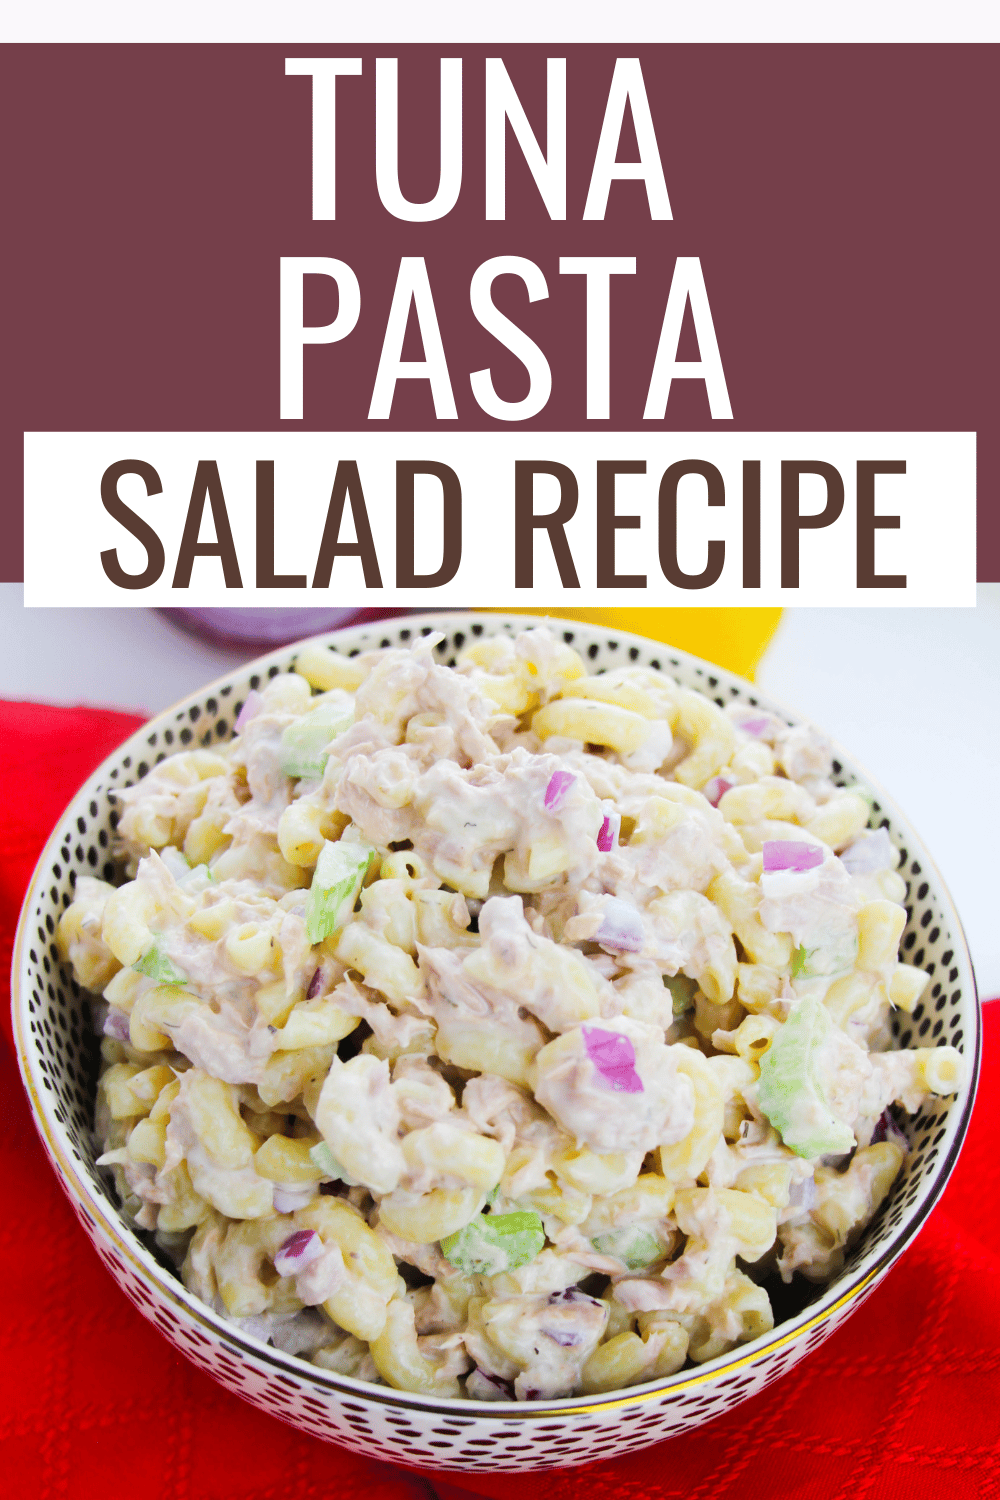 This Tuna Pasta Salad recipe is a creamy, mayo-based pasta salad, loaded with flavor. It’s the perfect potluck dish, or easy lunch for work. #tunapastasaladrecipe #pastasalad #tuna #recipe #salad via @wondermomwannab